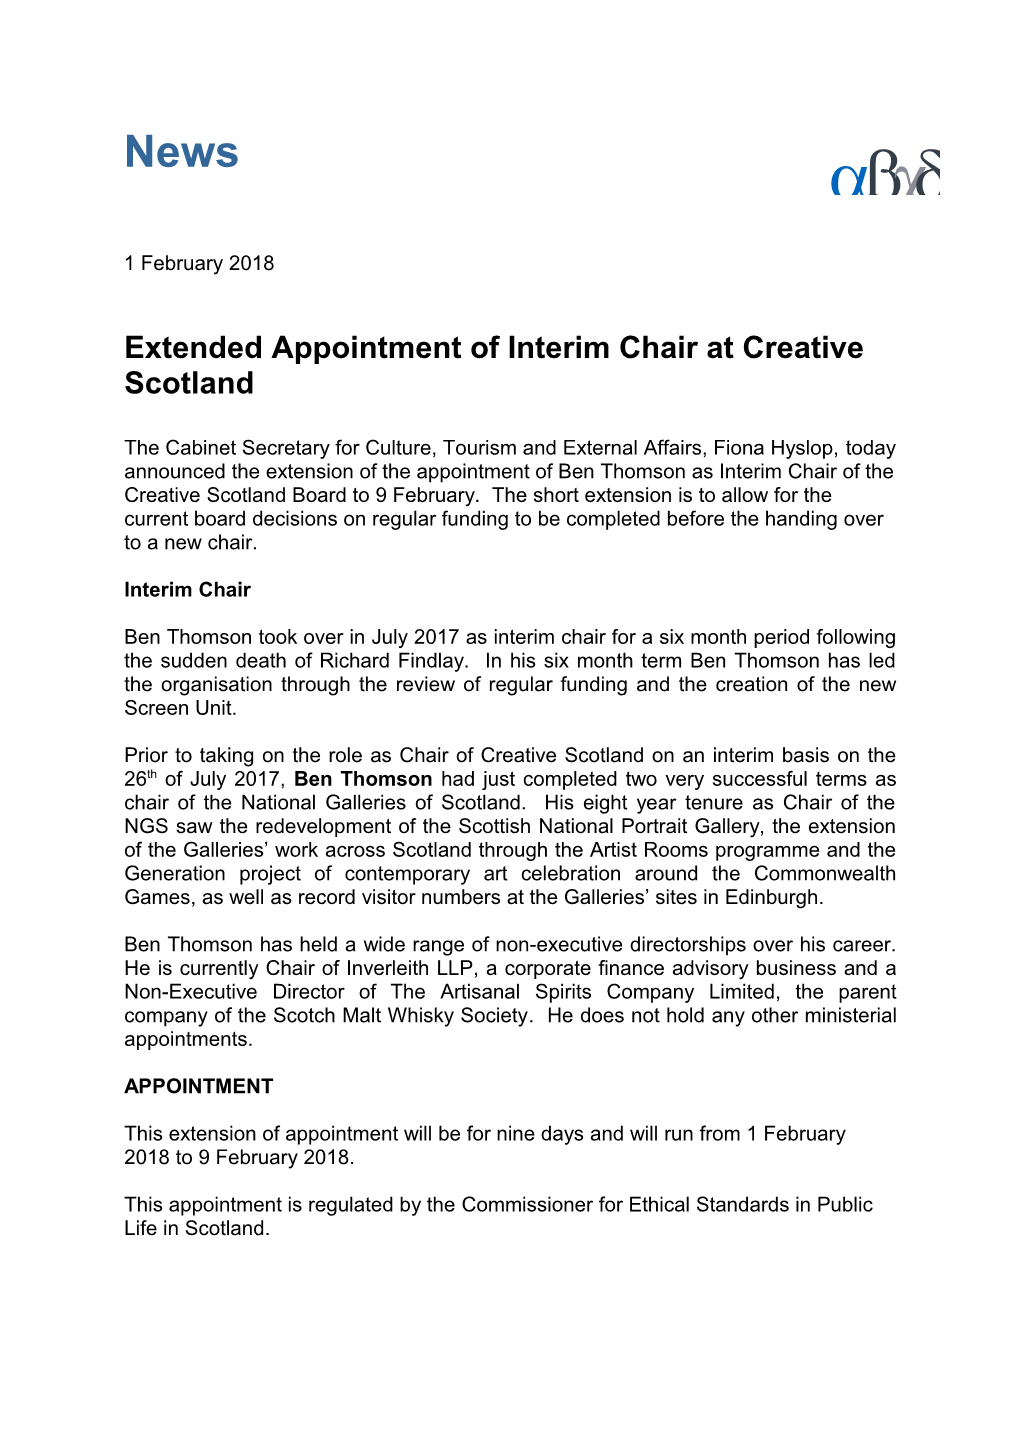 Extended Appointment of Interim Chair at Creative Scotland